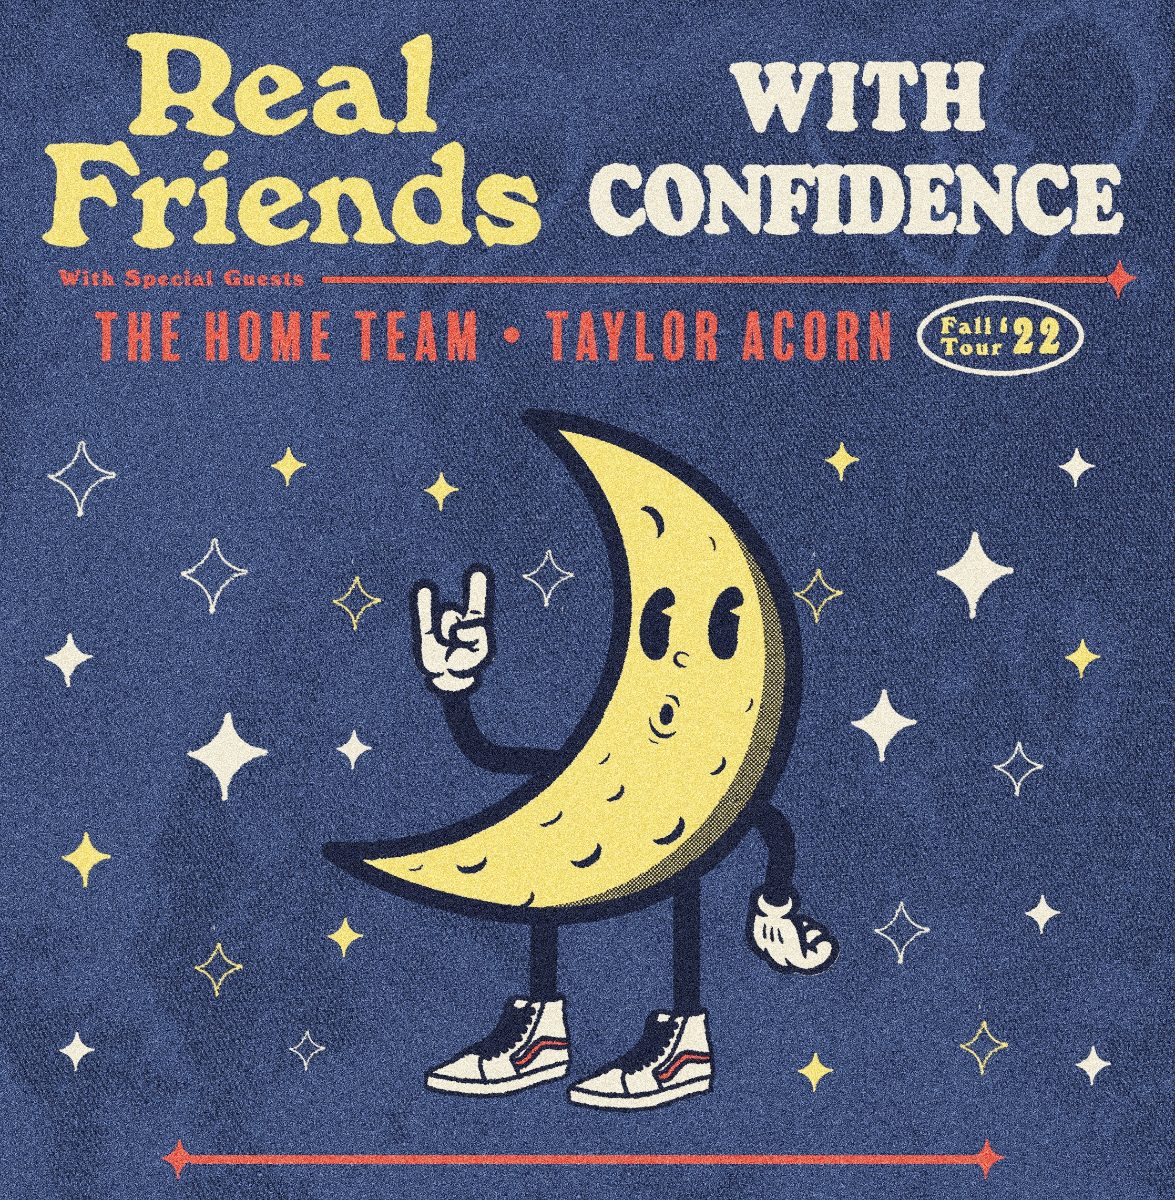 real friends and with confidence tour